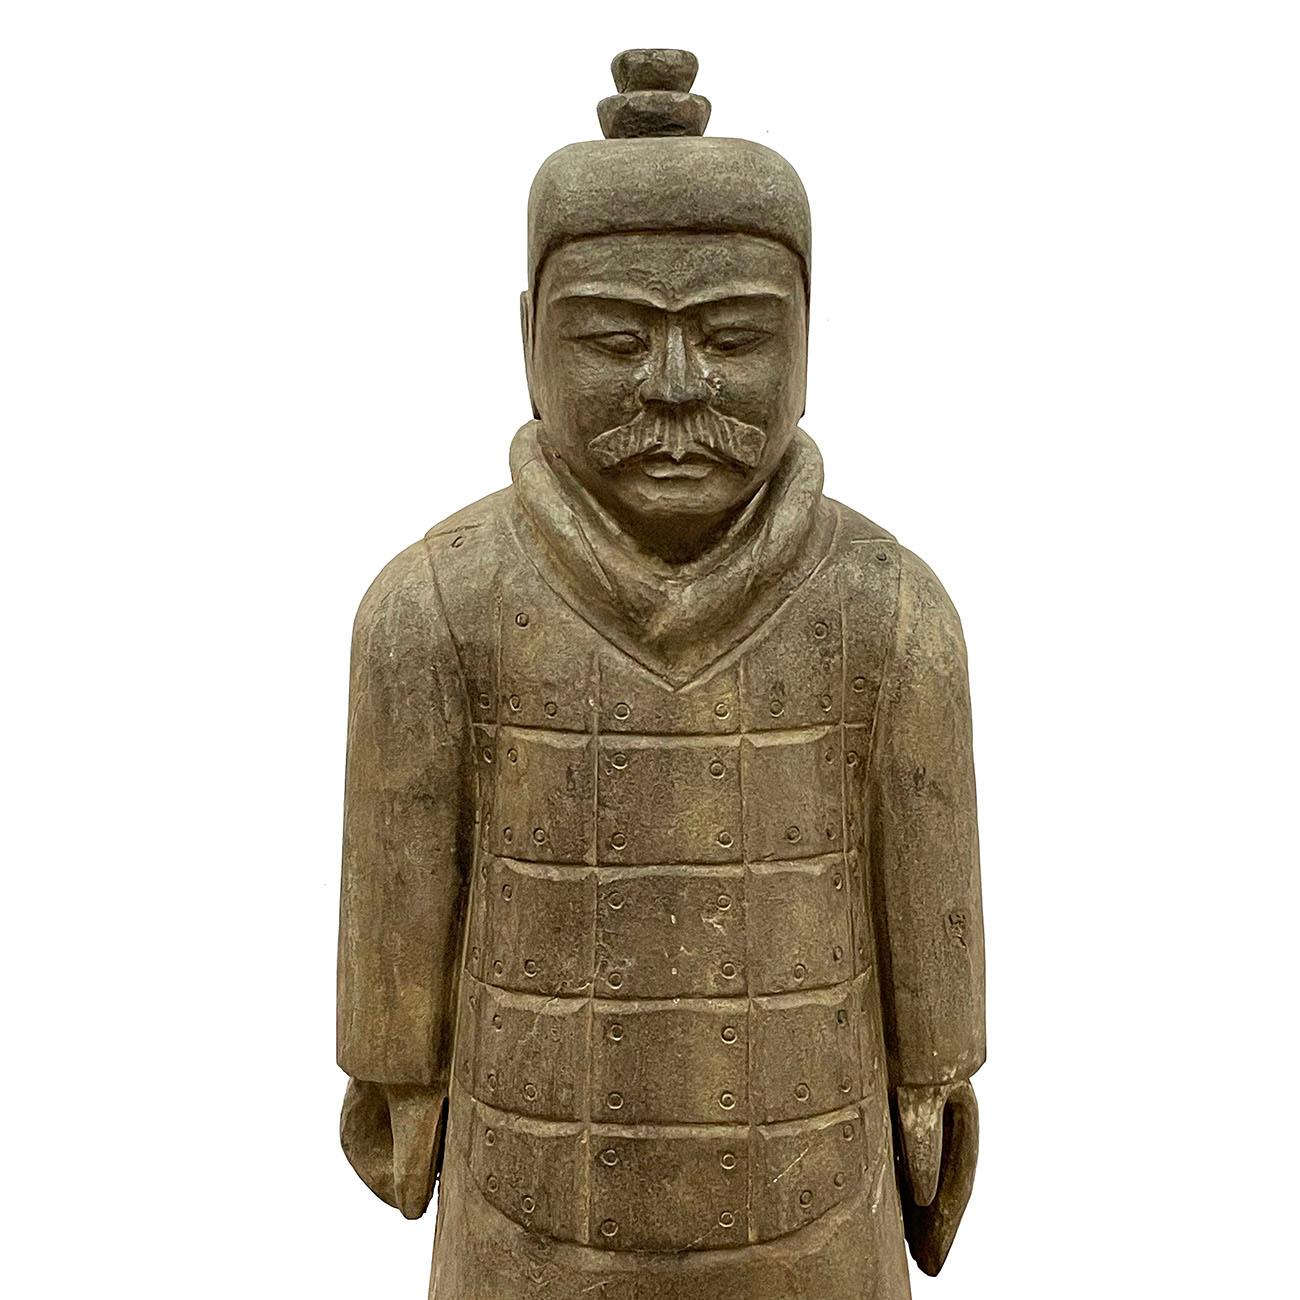 Look at this replica of world famous Chinese Qin Dynasty Stone Terra cotta Warriors, also known as the 8th wonder of the world, Terra cotta Army, which discover by the local farmer who dug water well near the tomb of Qin Shi Huang, the first Emperor